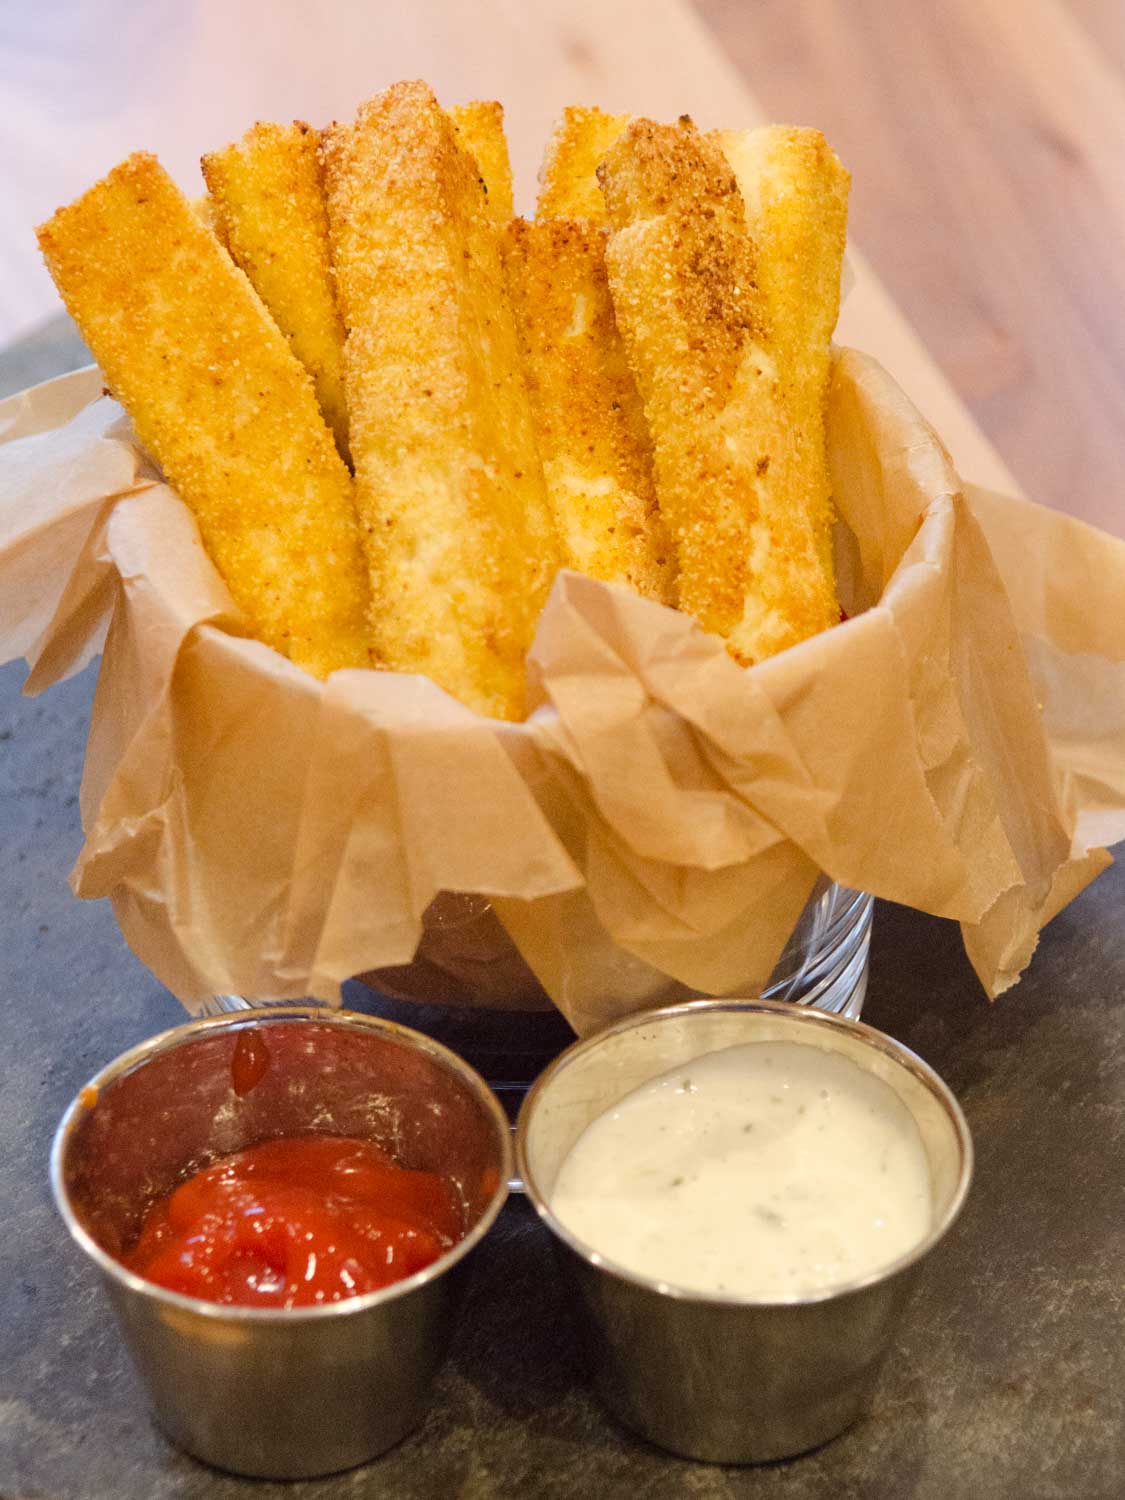 Crispy Baked Tofu Fries with Ranch and Ketchup